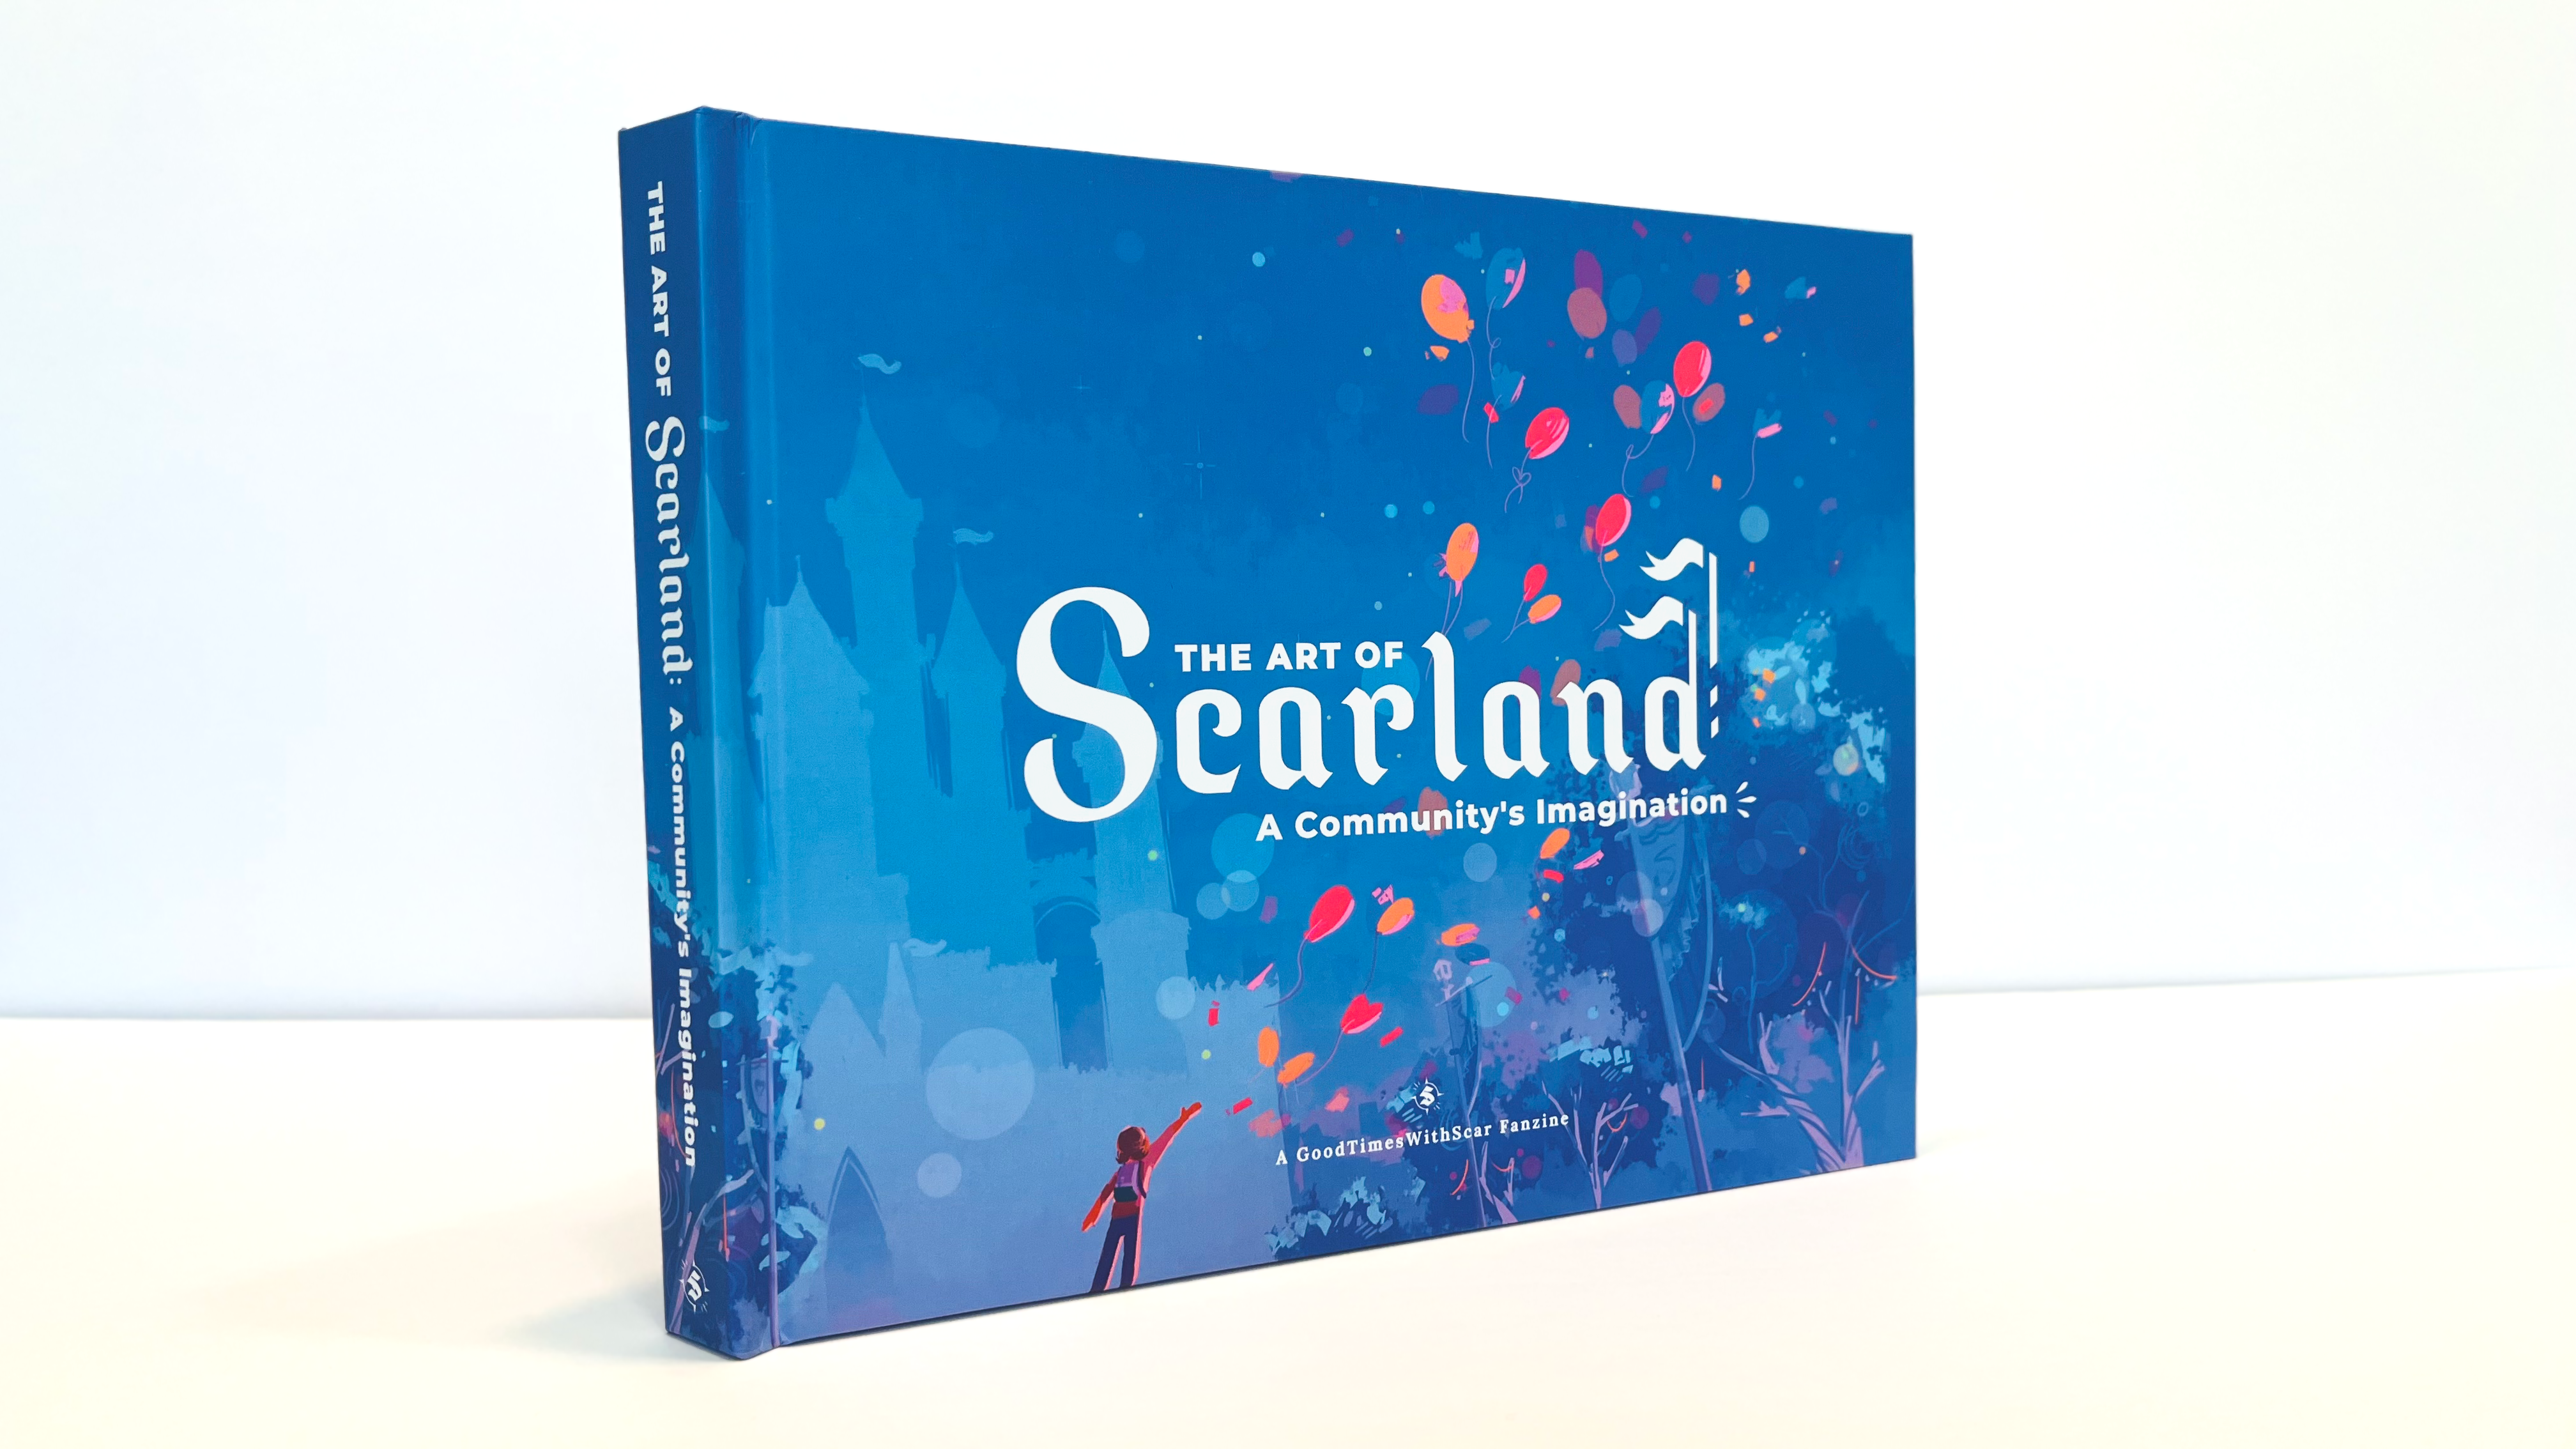 The Scarland Artbook on a white surface with a white background. It is stood such that the front and spine are visible.